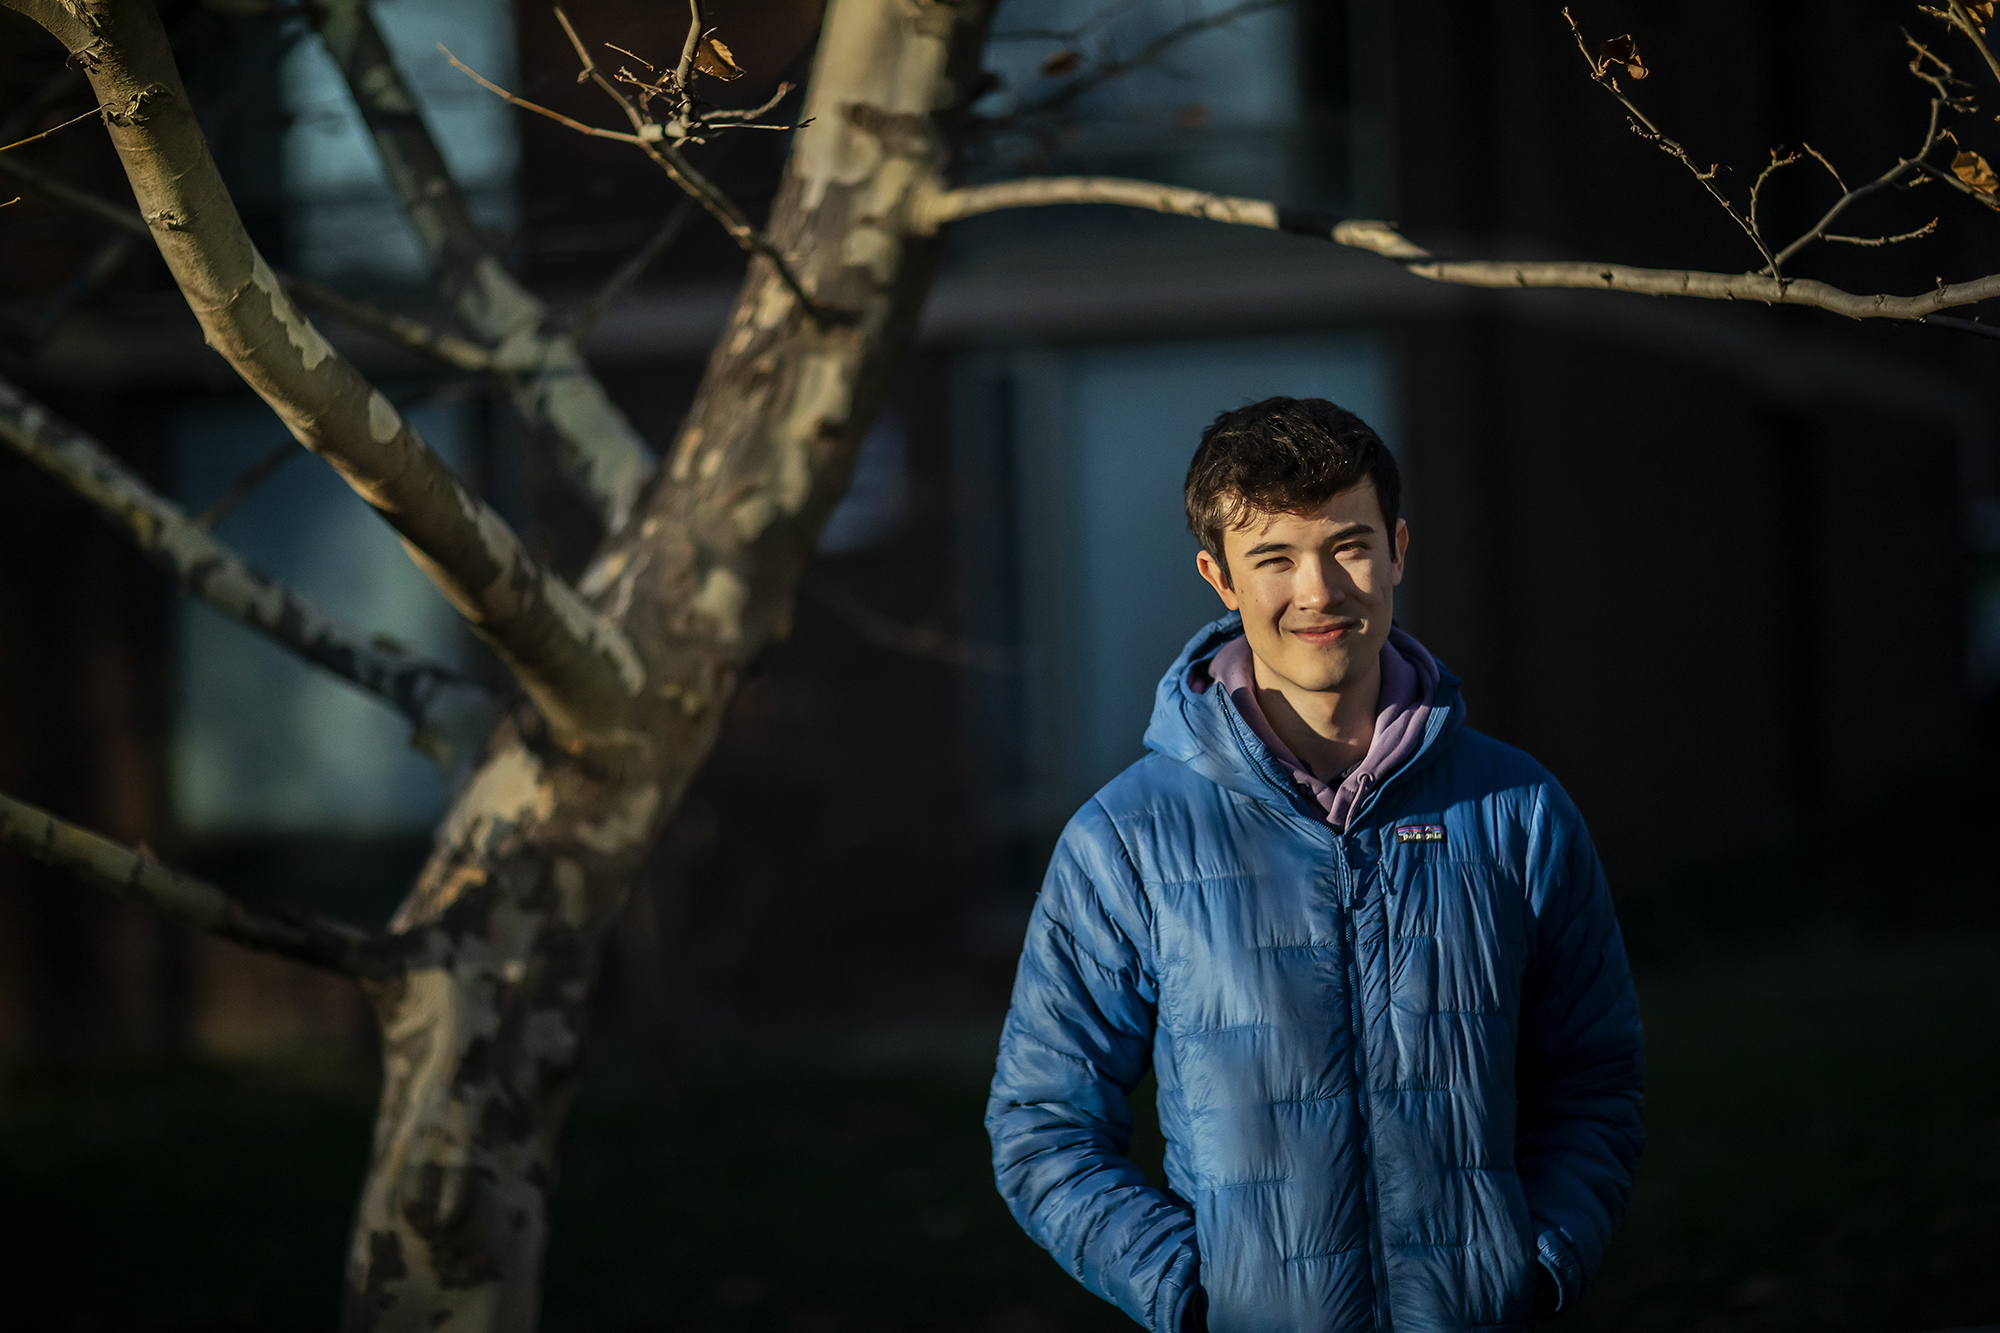 Man in blue jacket smiles next to bare tree